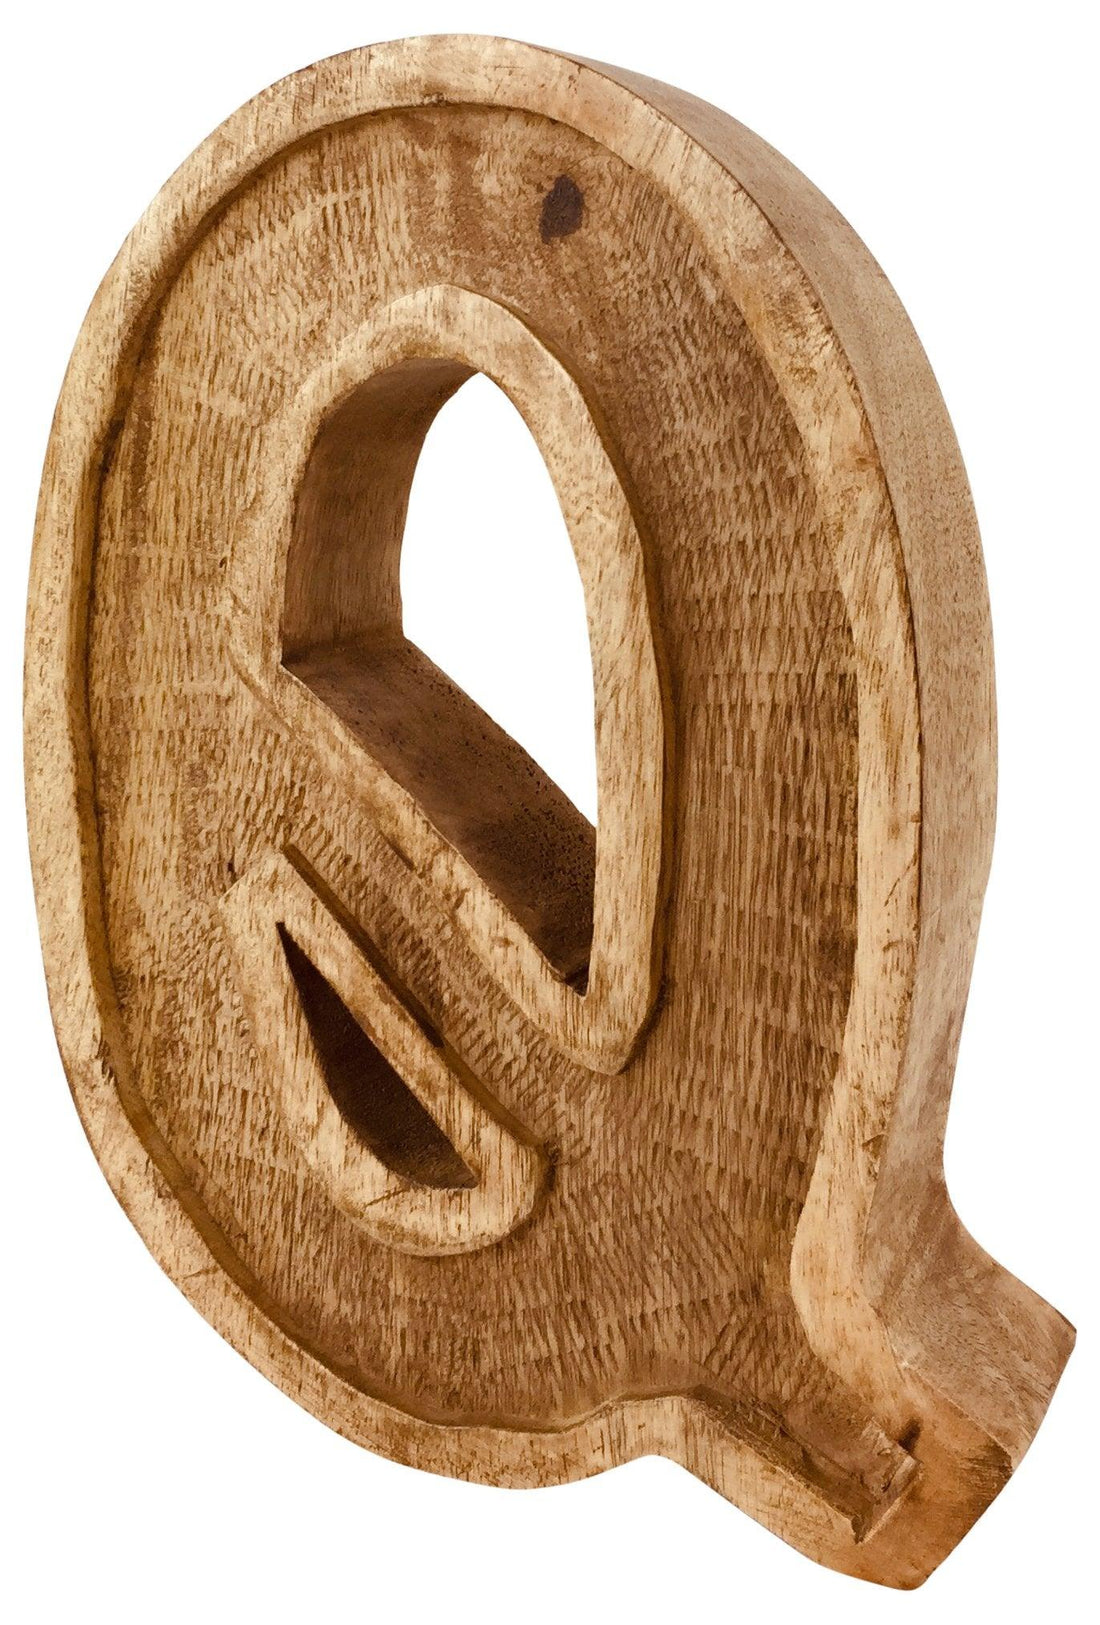 Hand Carved Wooden Embossed Letter Q - £18.99 - Single Letters 